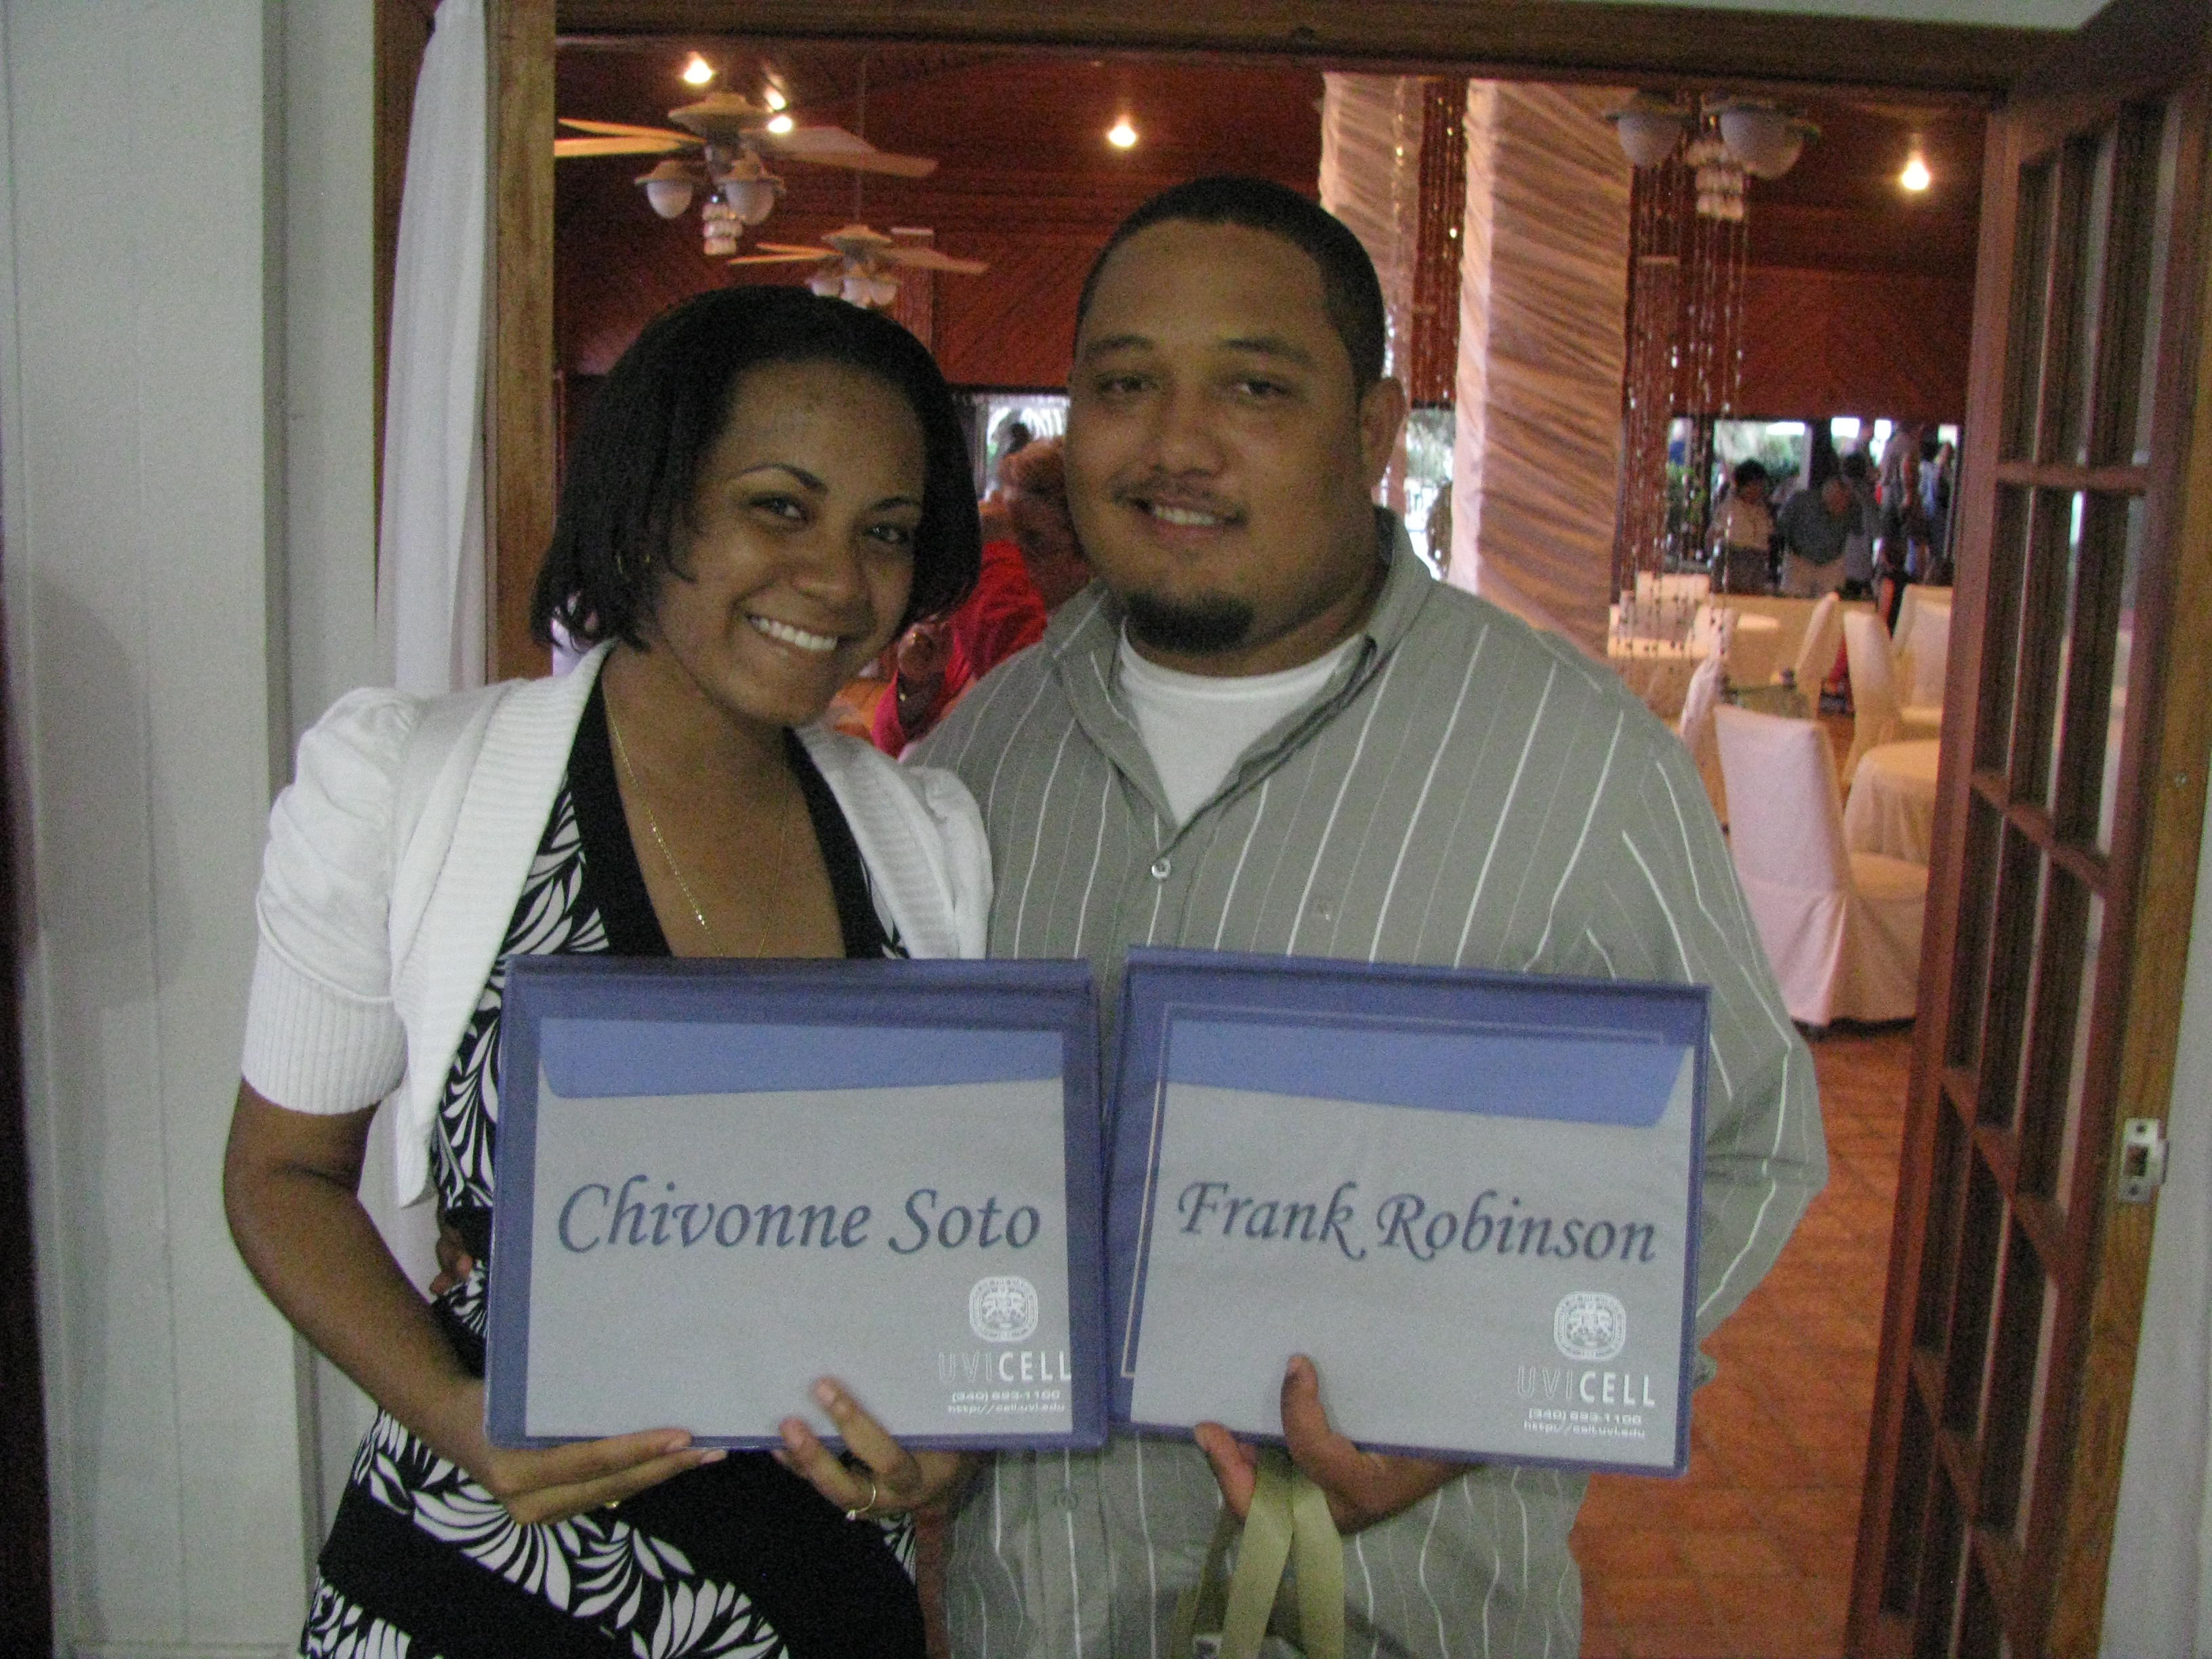 Top bartending grads, Chivonne Stoto and Frank Robinson.